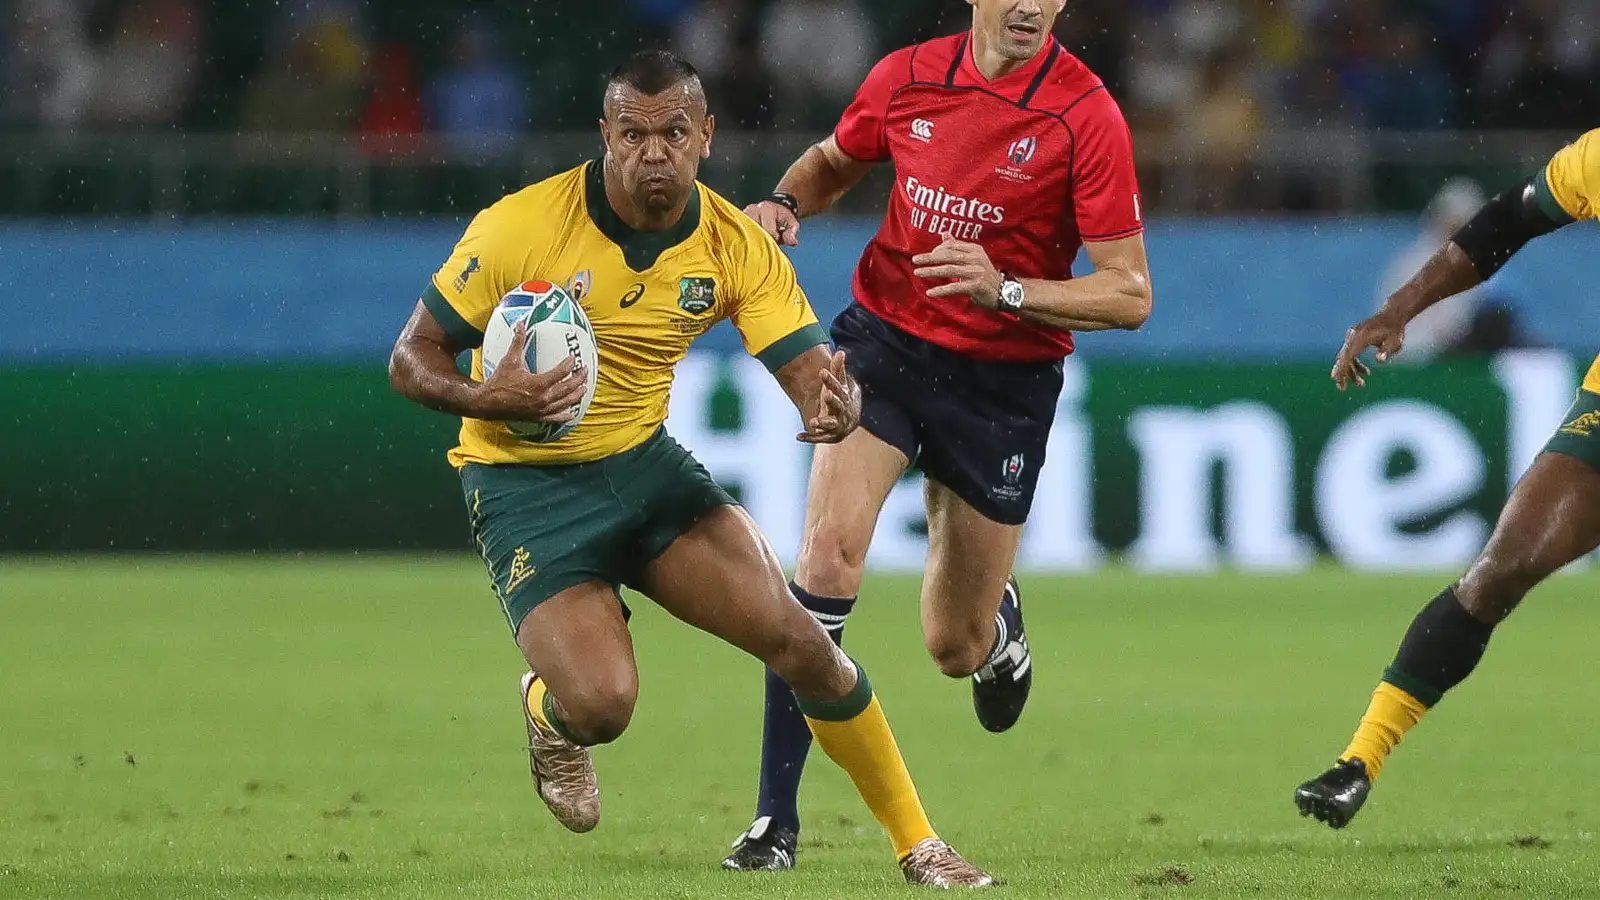 Kurtley Beale with ball in hand for the Wallabies during the 2019 Rugby World Cup